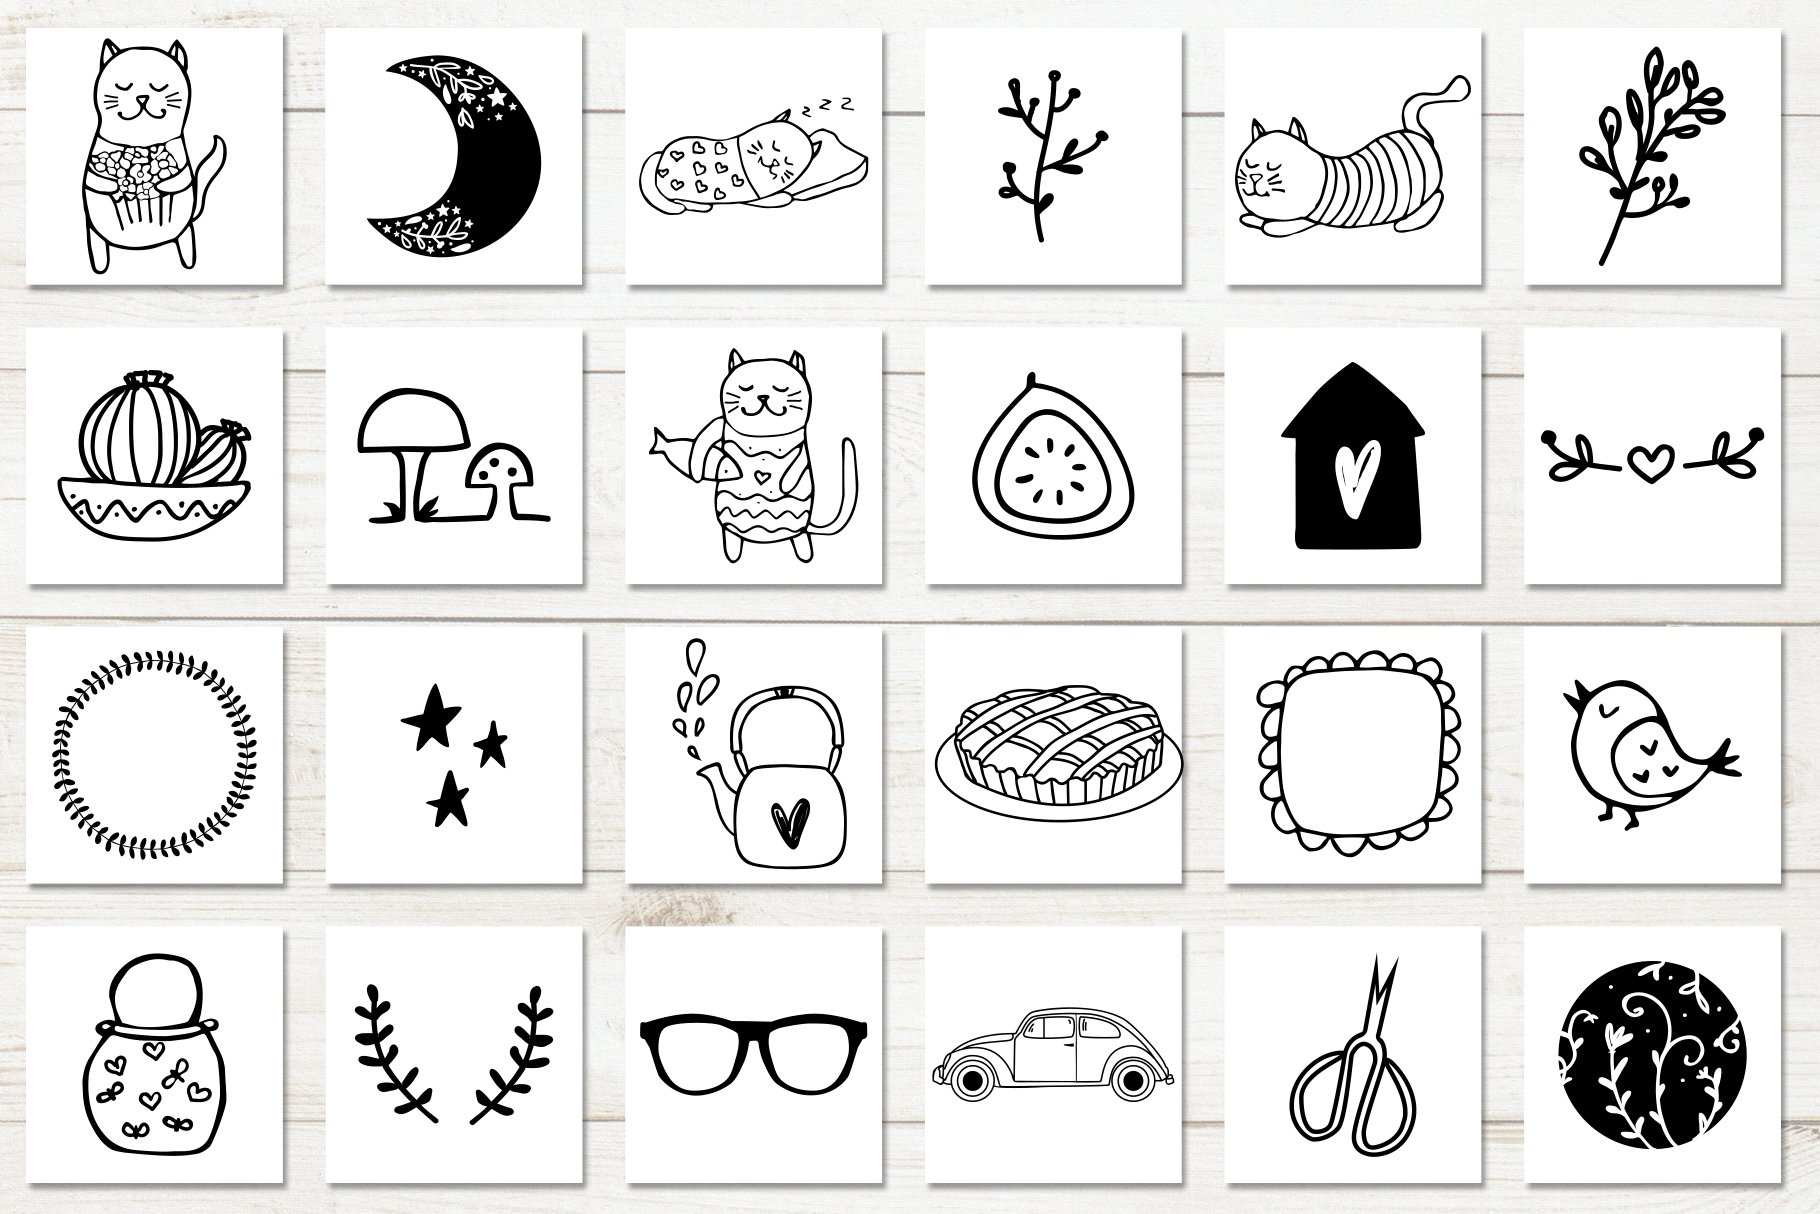 100 Hand Drawn Elements For Logo And Branding